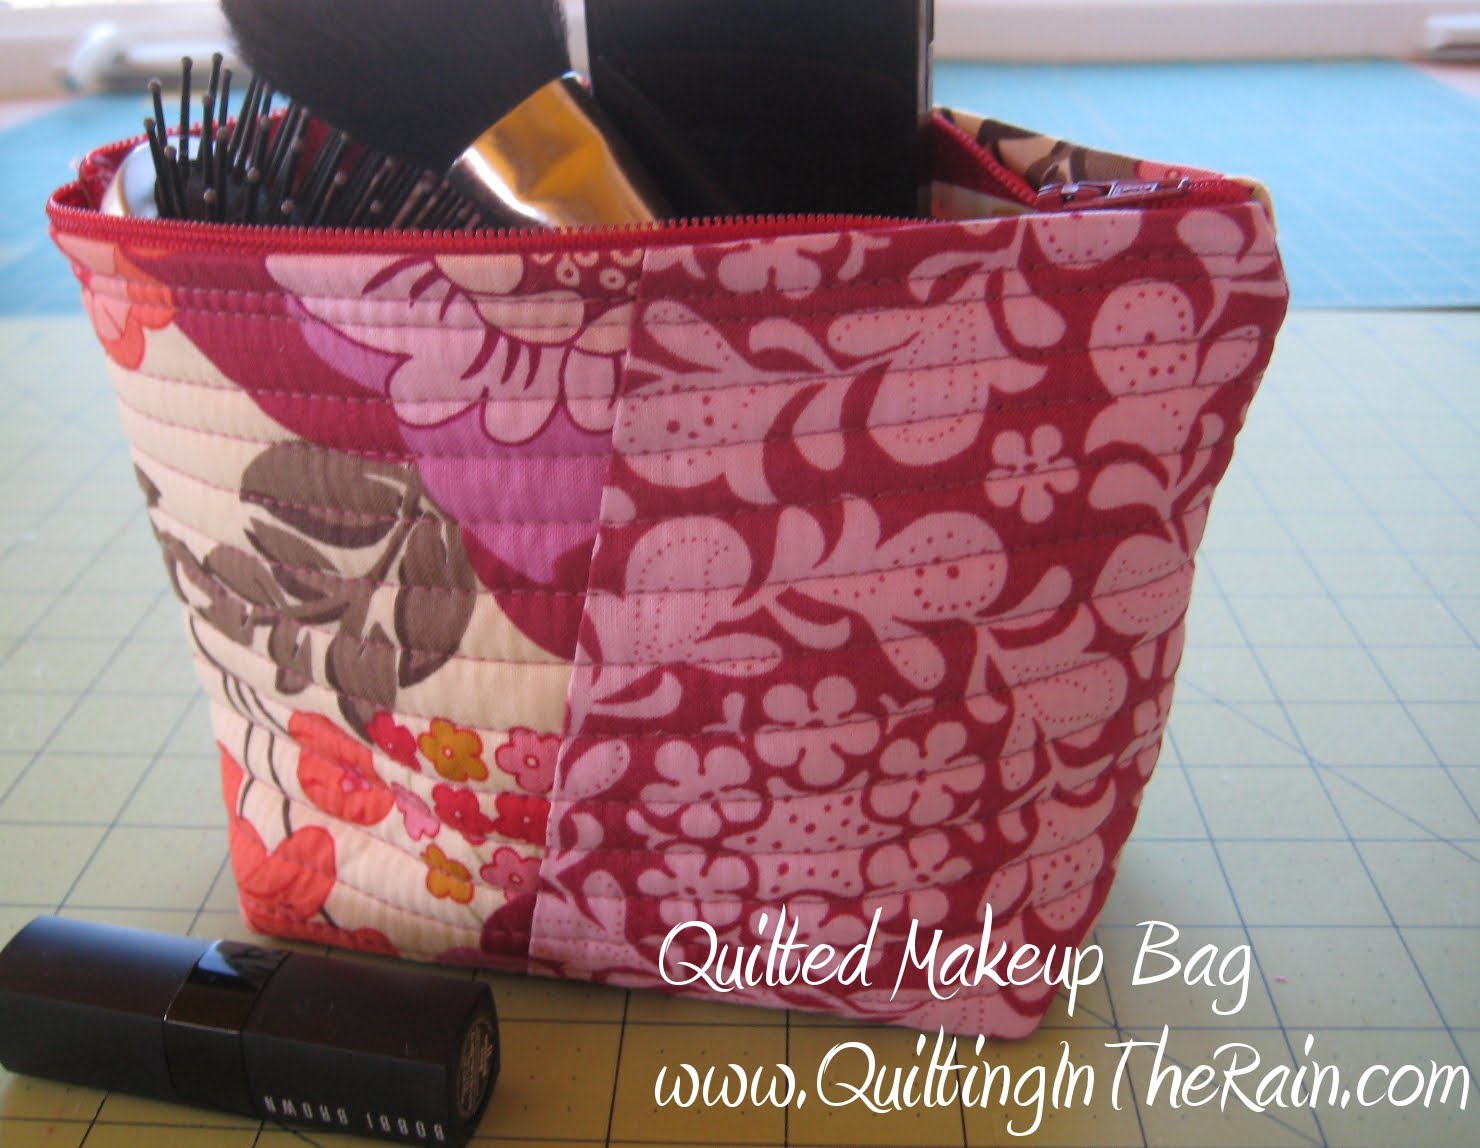 Quilted make up bags